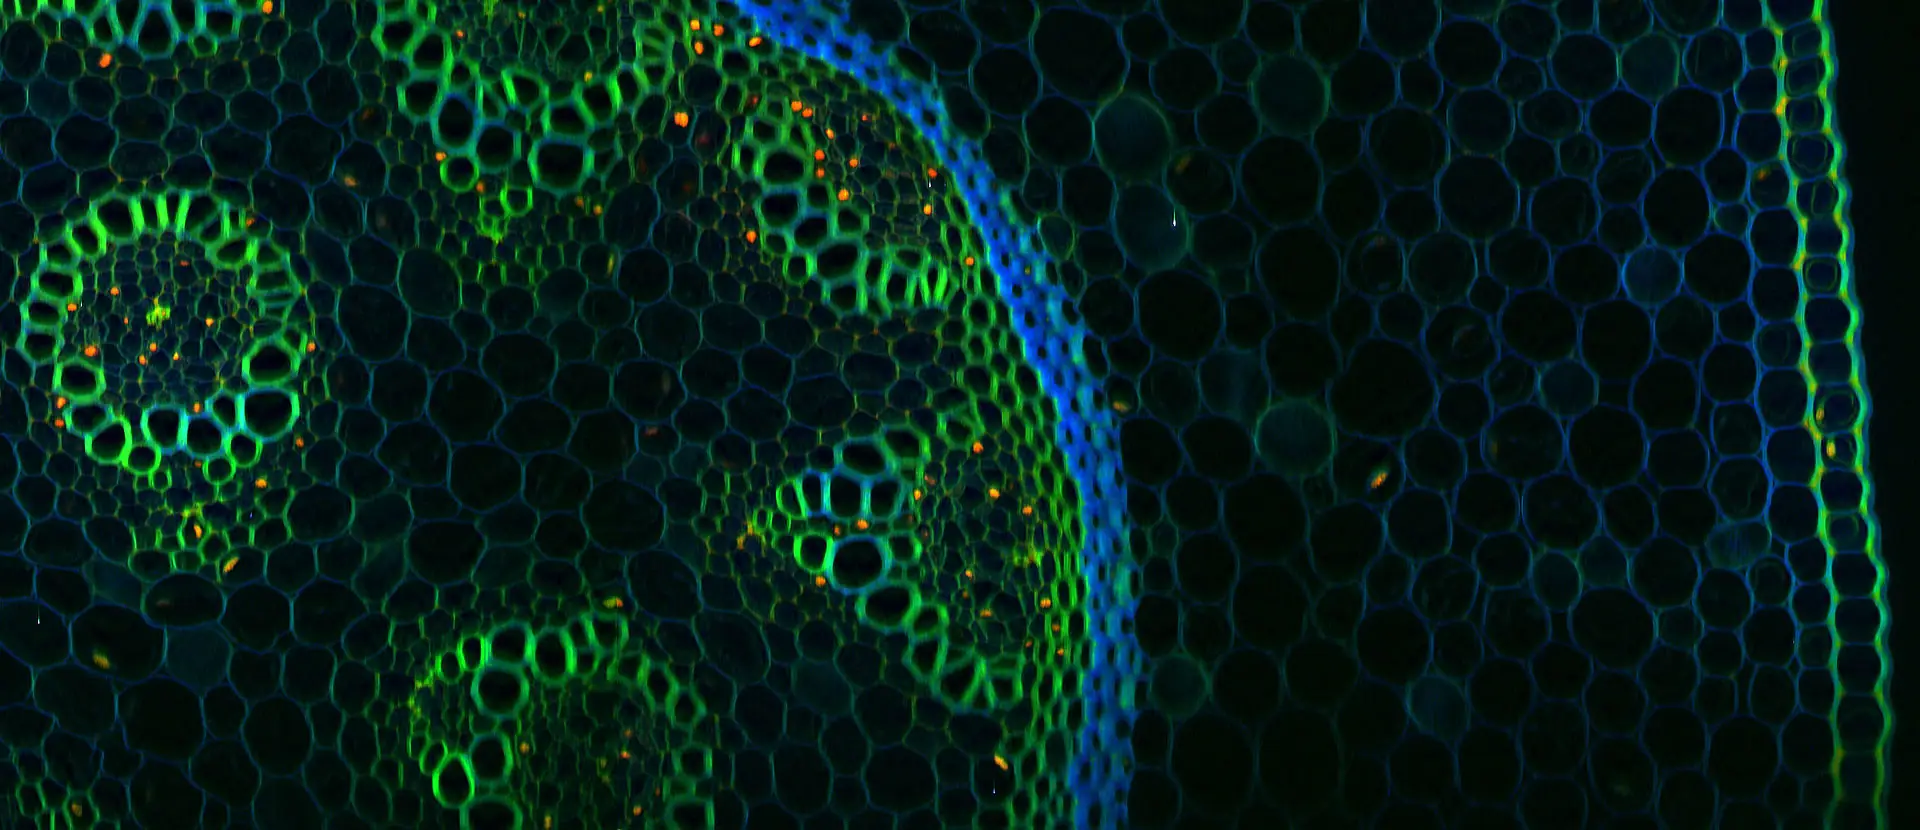 Two-photon fluorescence image (green) of a cross section of rhizome colored with lily of the valley. The excitement is at 840nm, and the red and blue colors represent other channels of multiphoton techniques which have been superimposed.